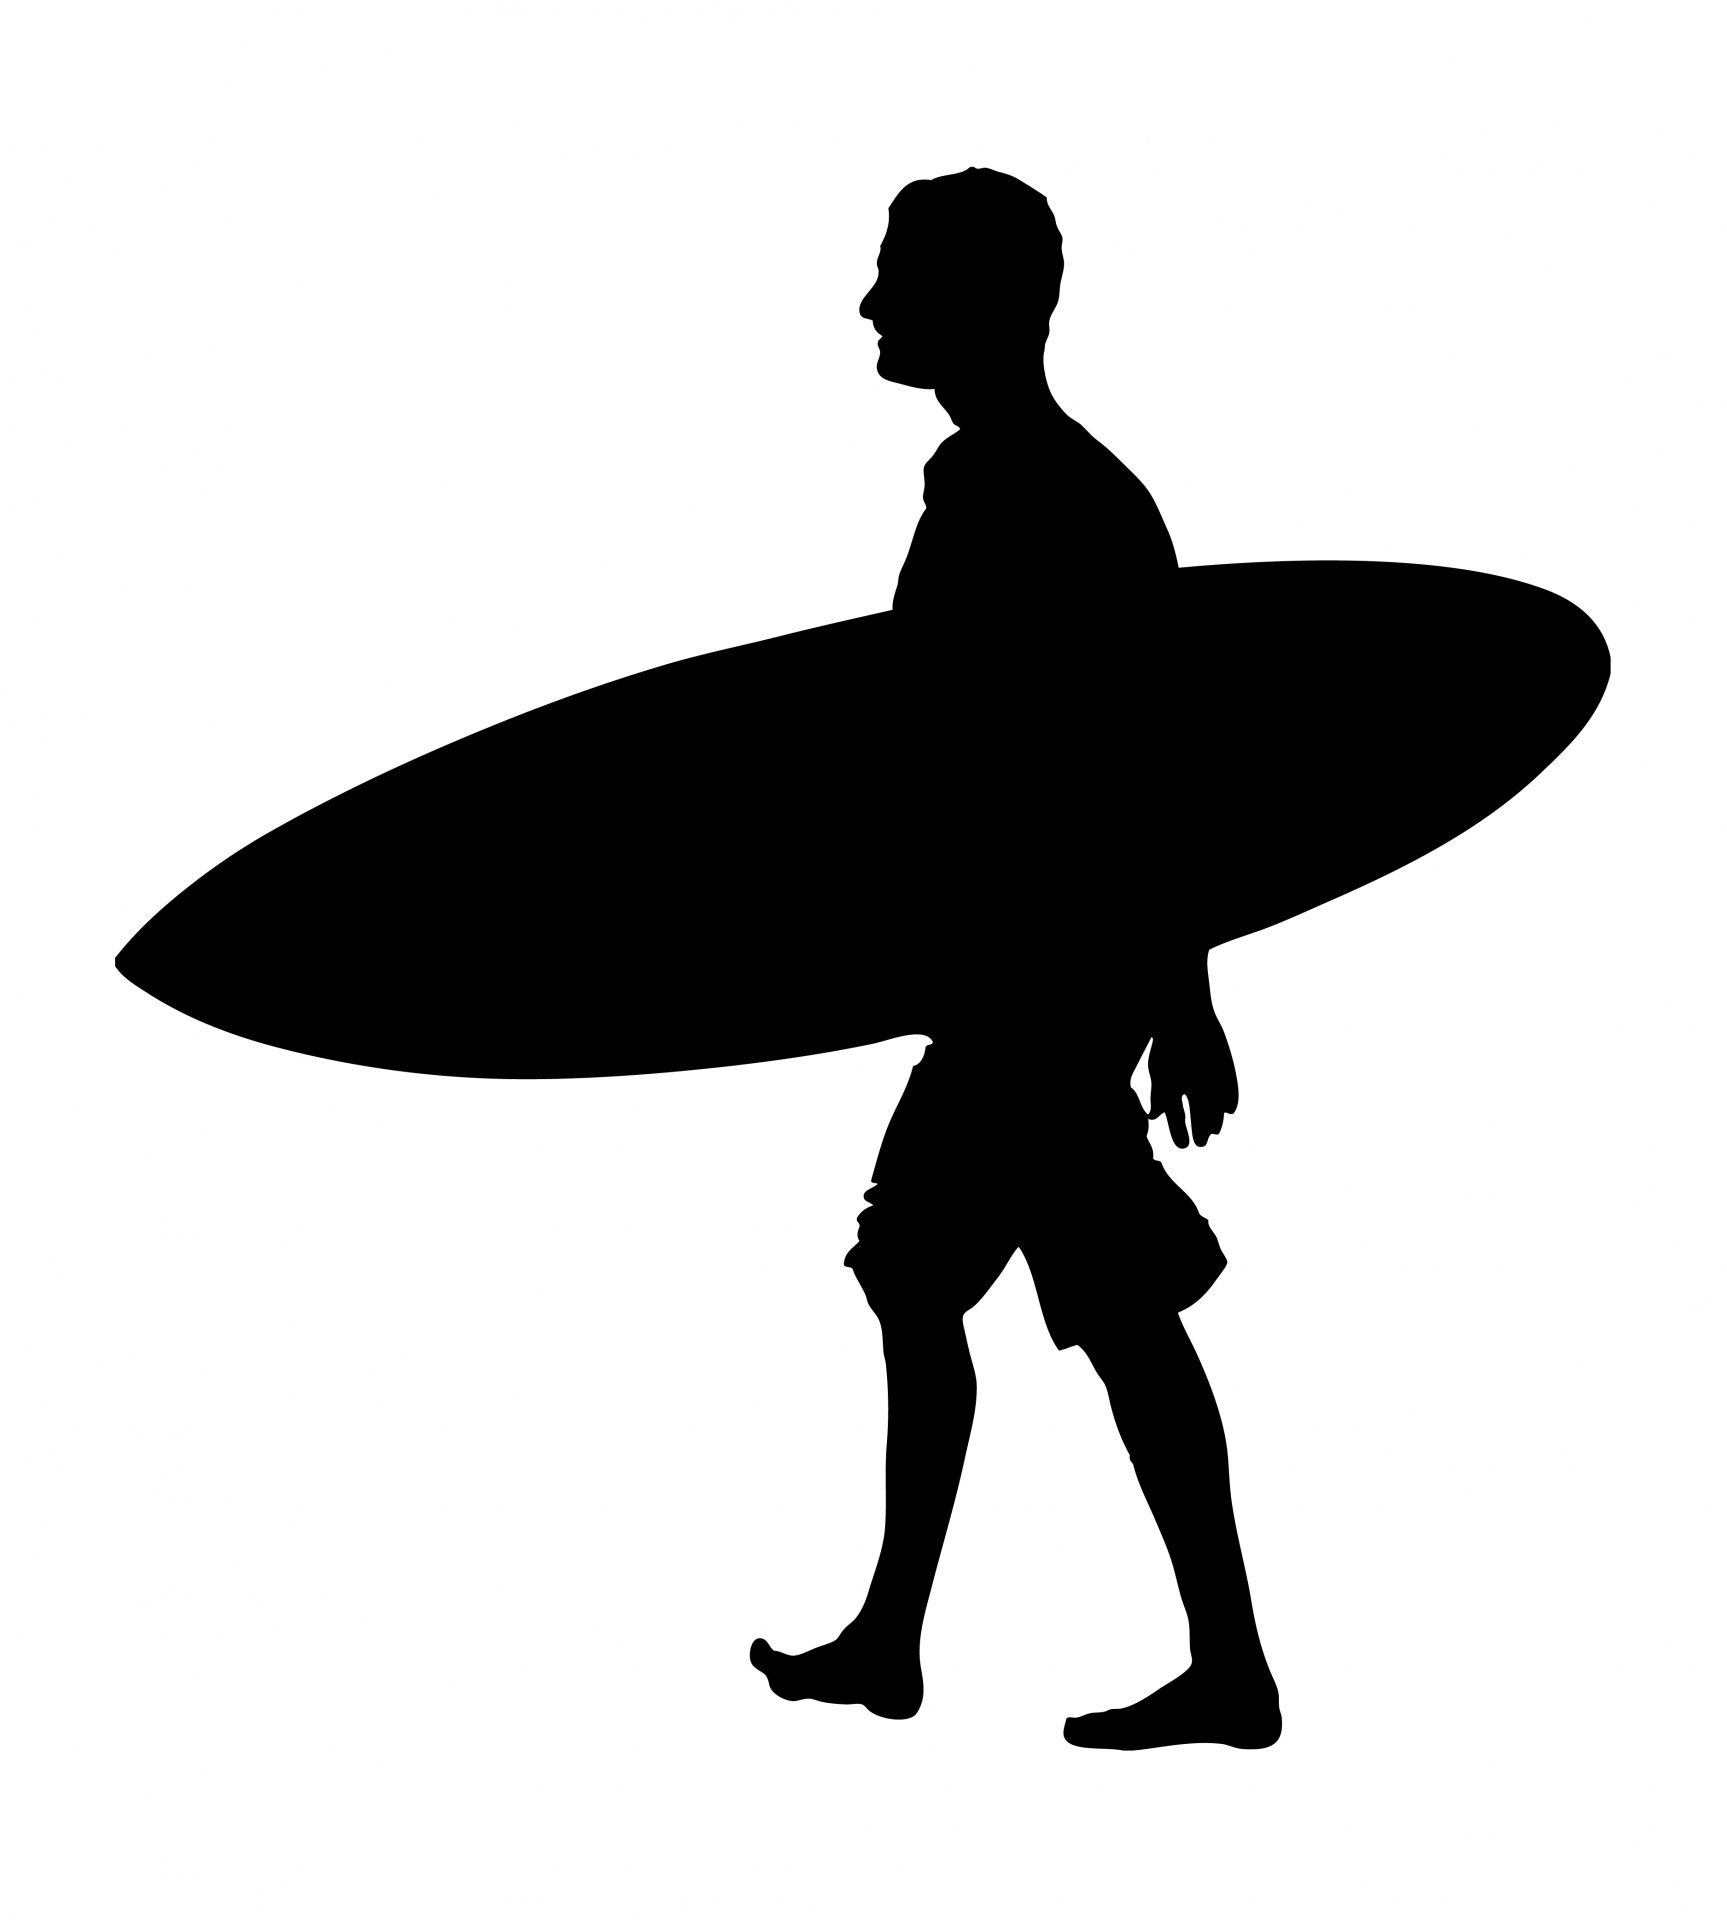 Man With Surfboard Silhouette